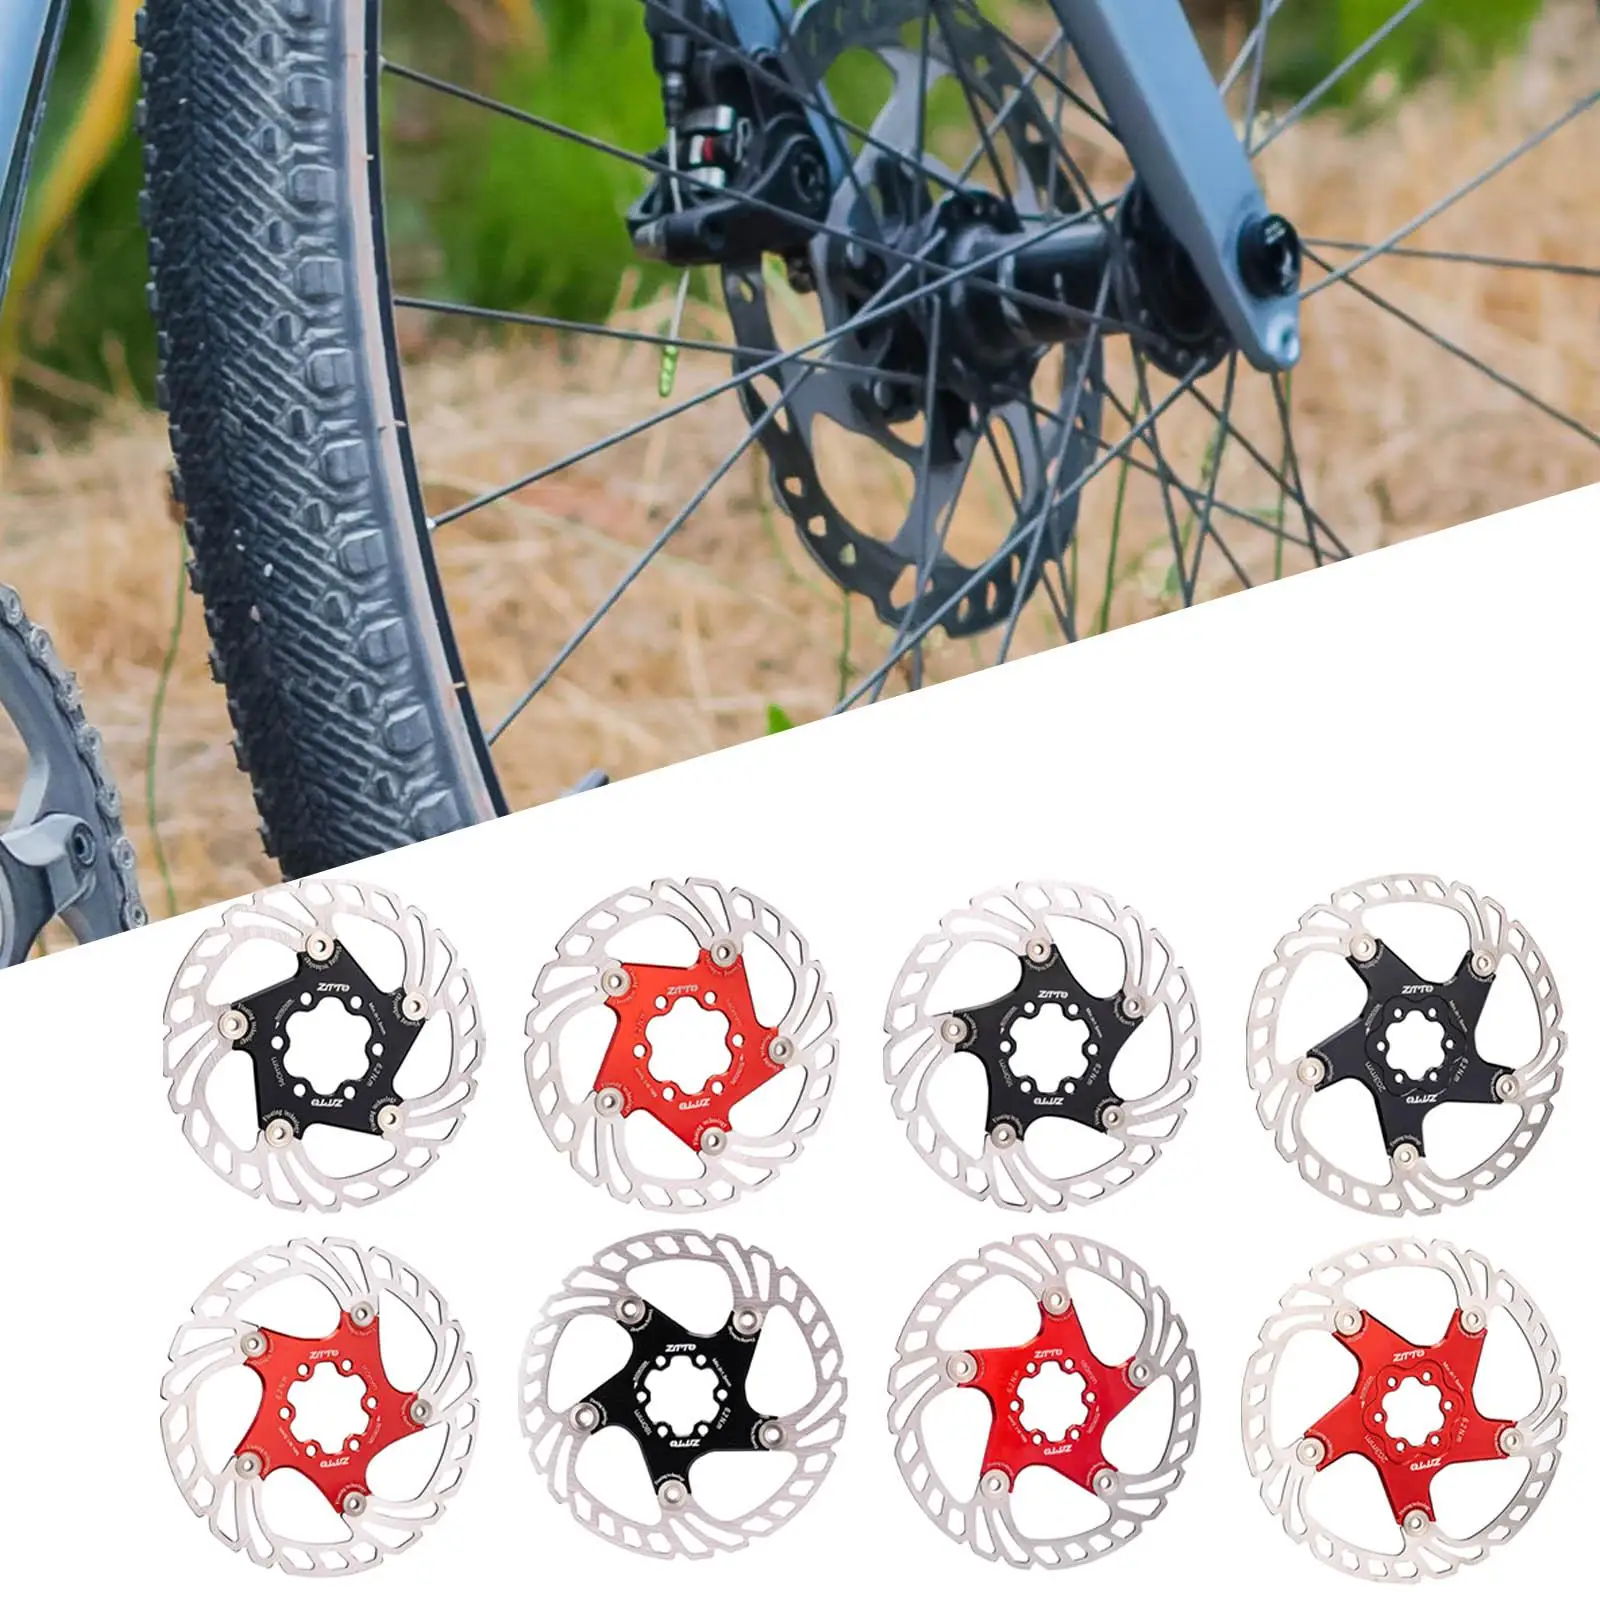 Lightweight Bike Hydraulic Disc Brake Rotor Stainless Steel Bicycle Rotor Floating Disc Brake Pads for Road Cycling Accessories